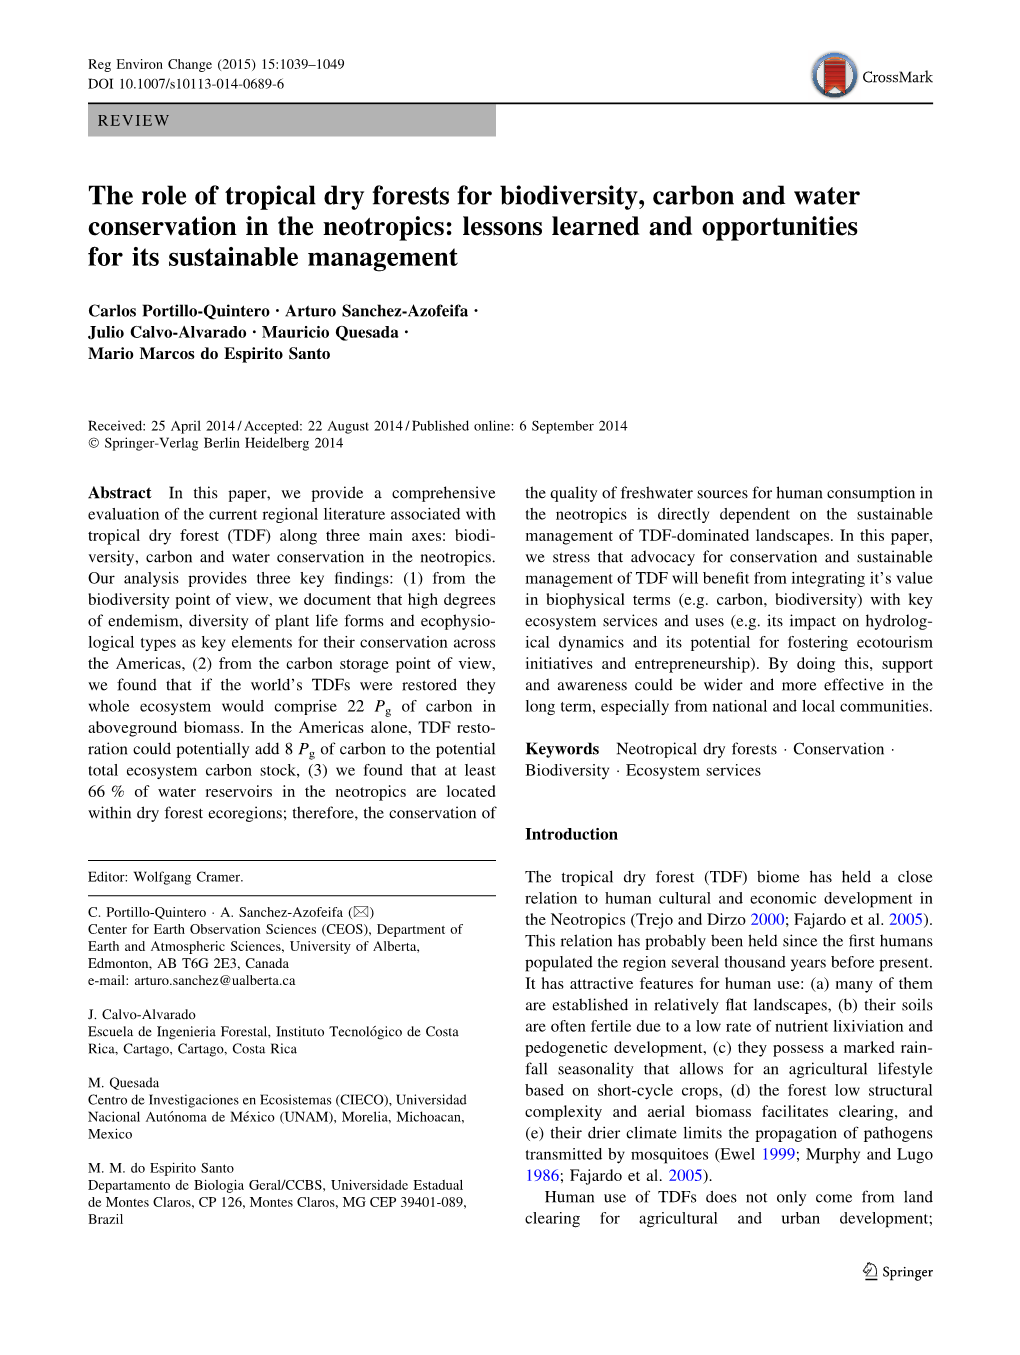 The Role of Tropical Dry Forests for Biodiversity, Carbon and Water Conservation in the Neotropics: Lessons Learned and Opportunities for Its Sustainable Management